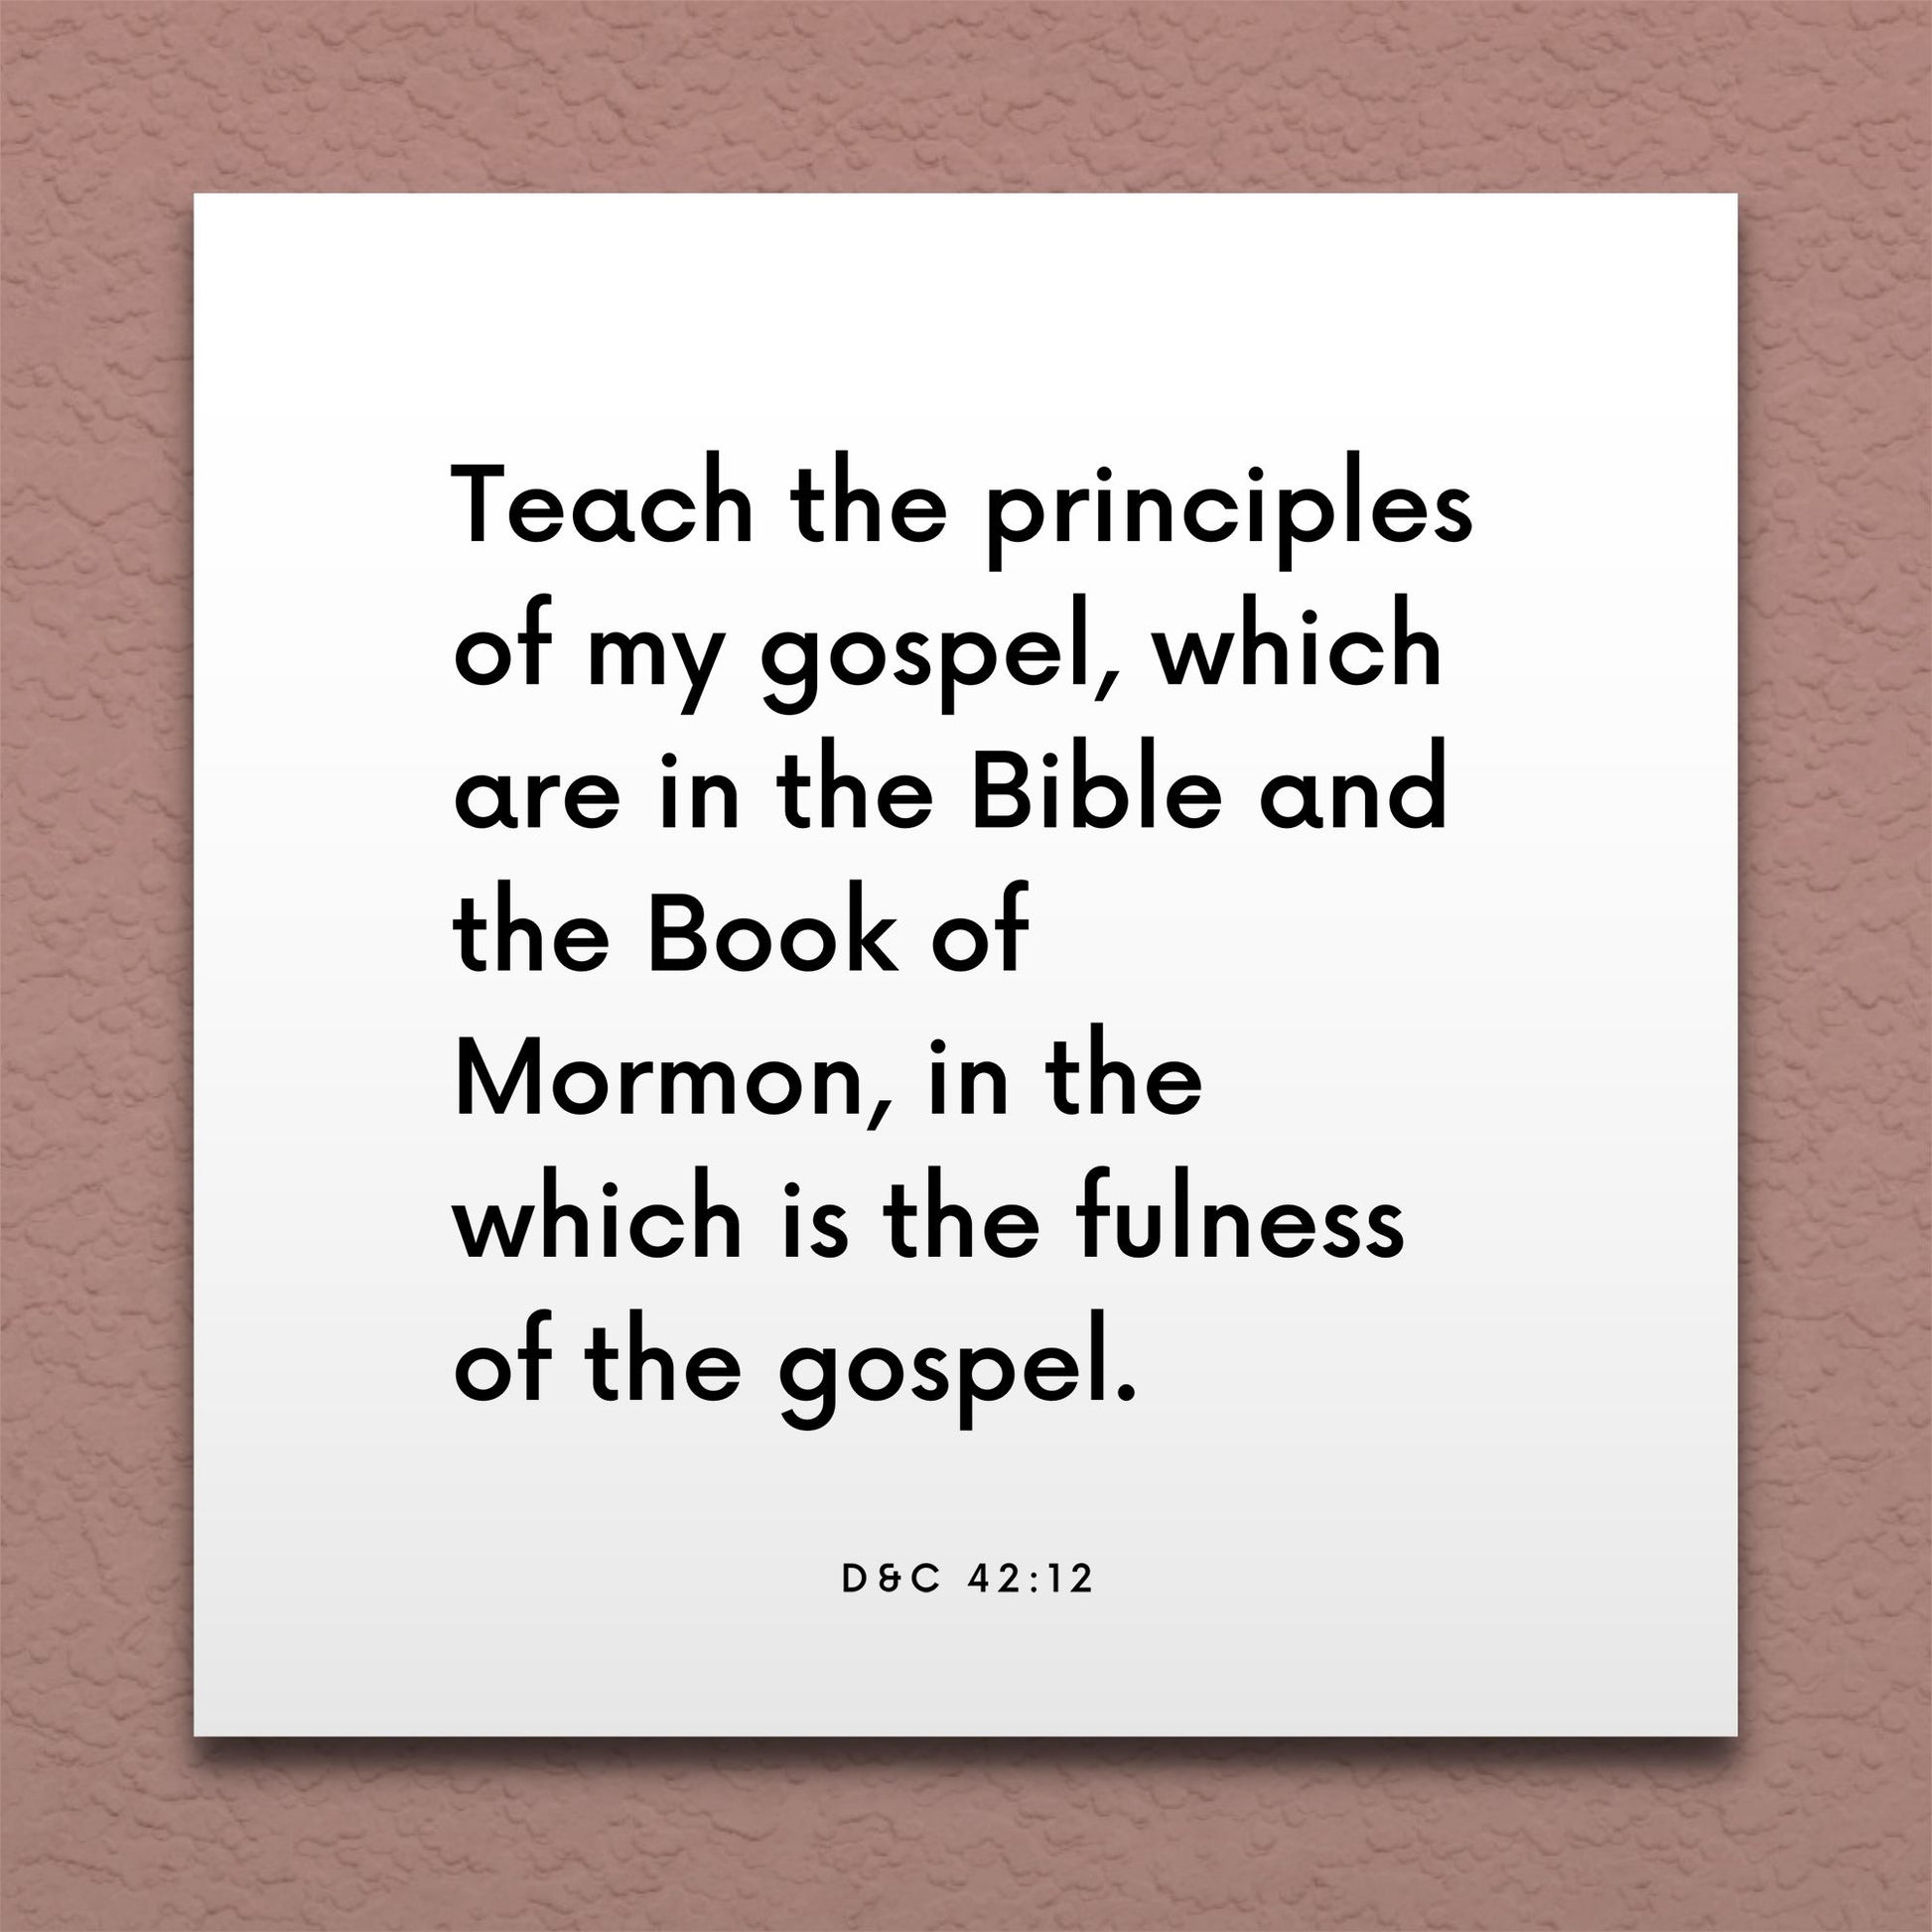 Wall-mounted scripture tile for D&C 42:12 - "In the which is the fulness of the gospel"